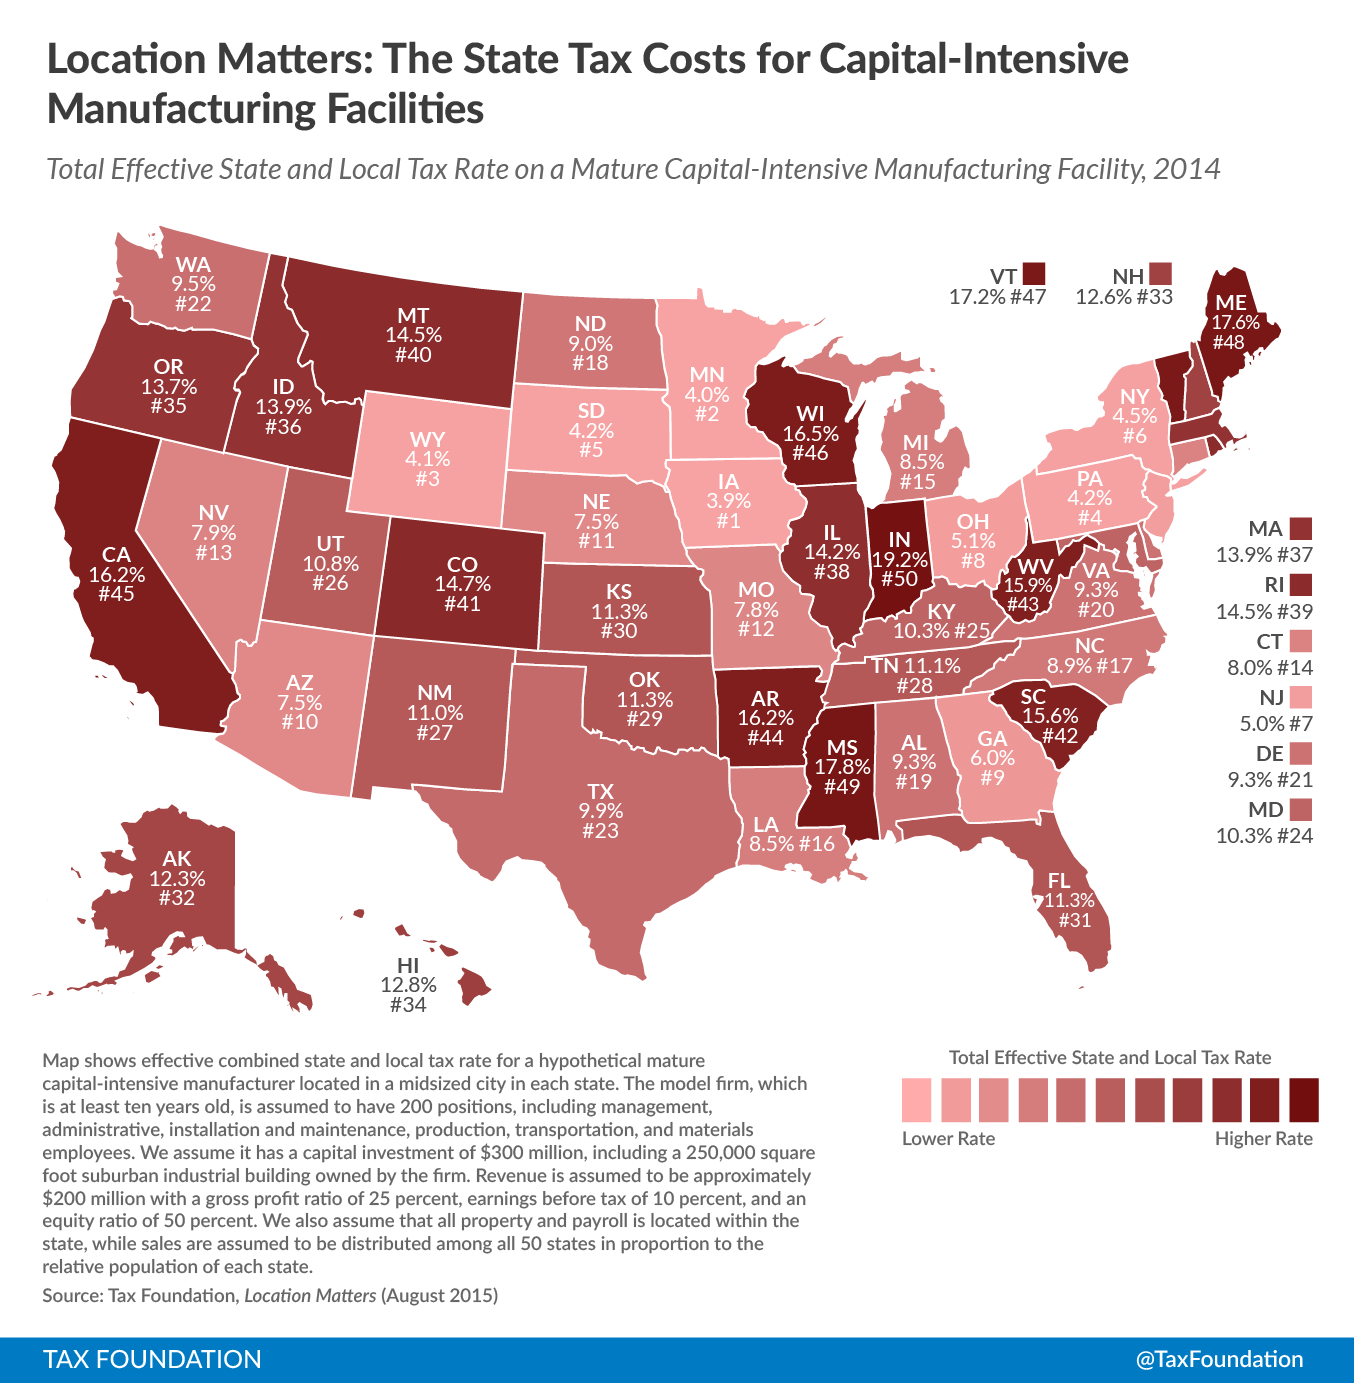 Location Matters - Capital-Intensive Manufacturers